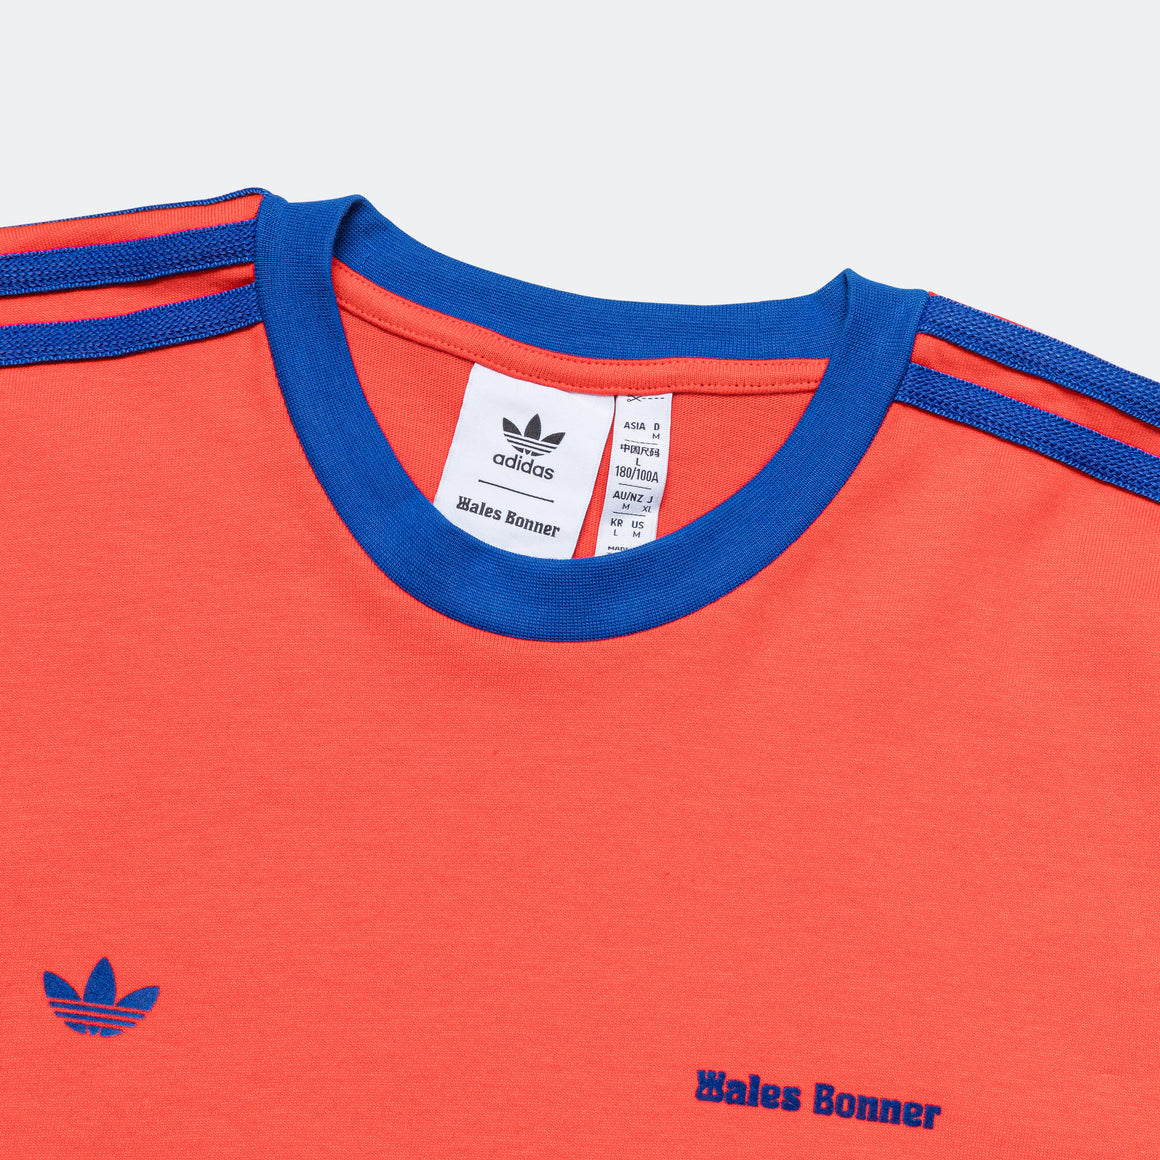 adidas - S/S Tee x Wales Bonner - Bold Orange/Royal Blue - UP THERE